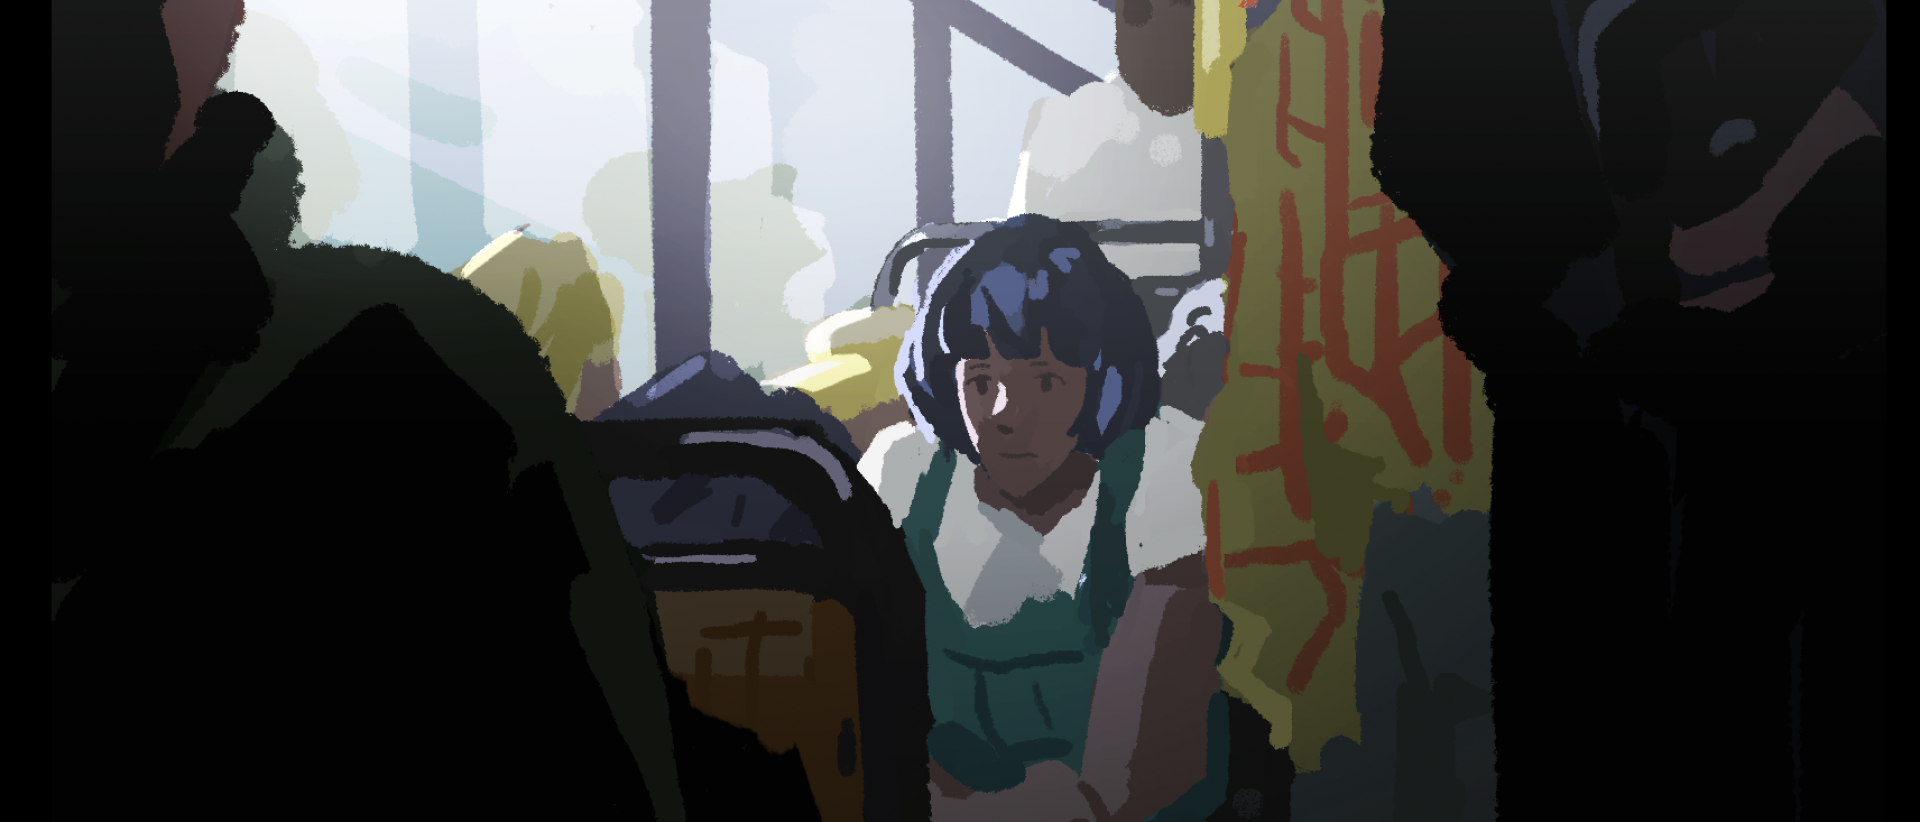 a still from an animated film featuring a person sitting on a crowded bus